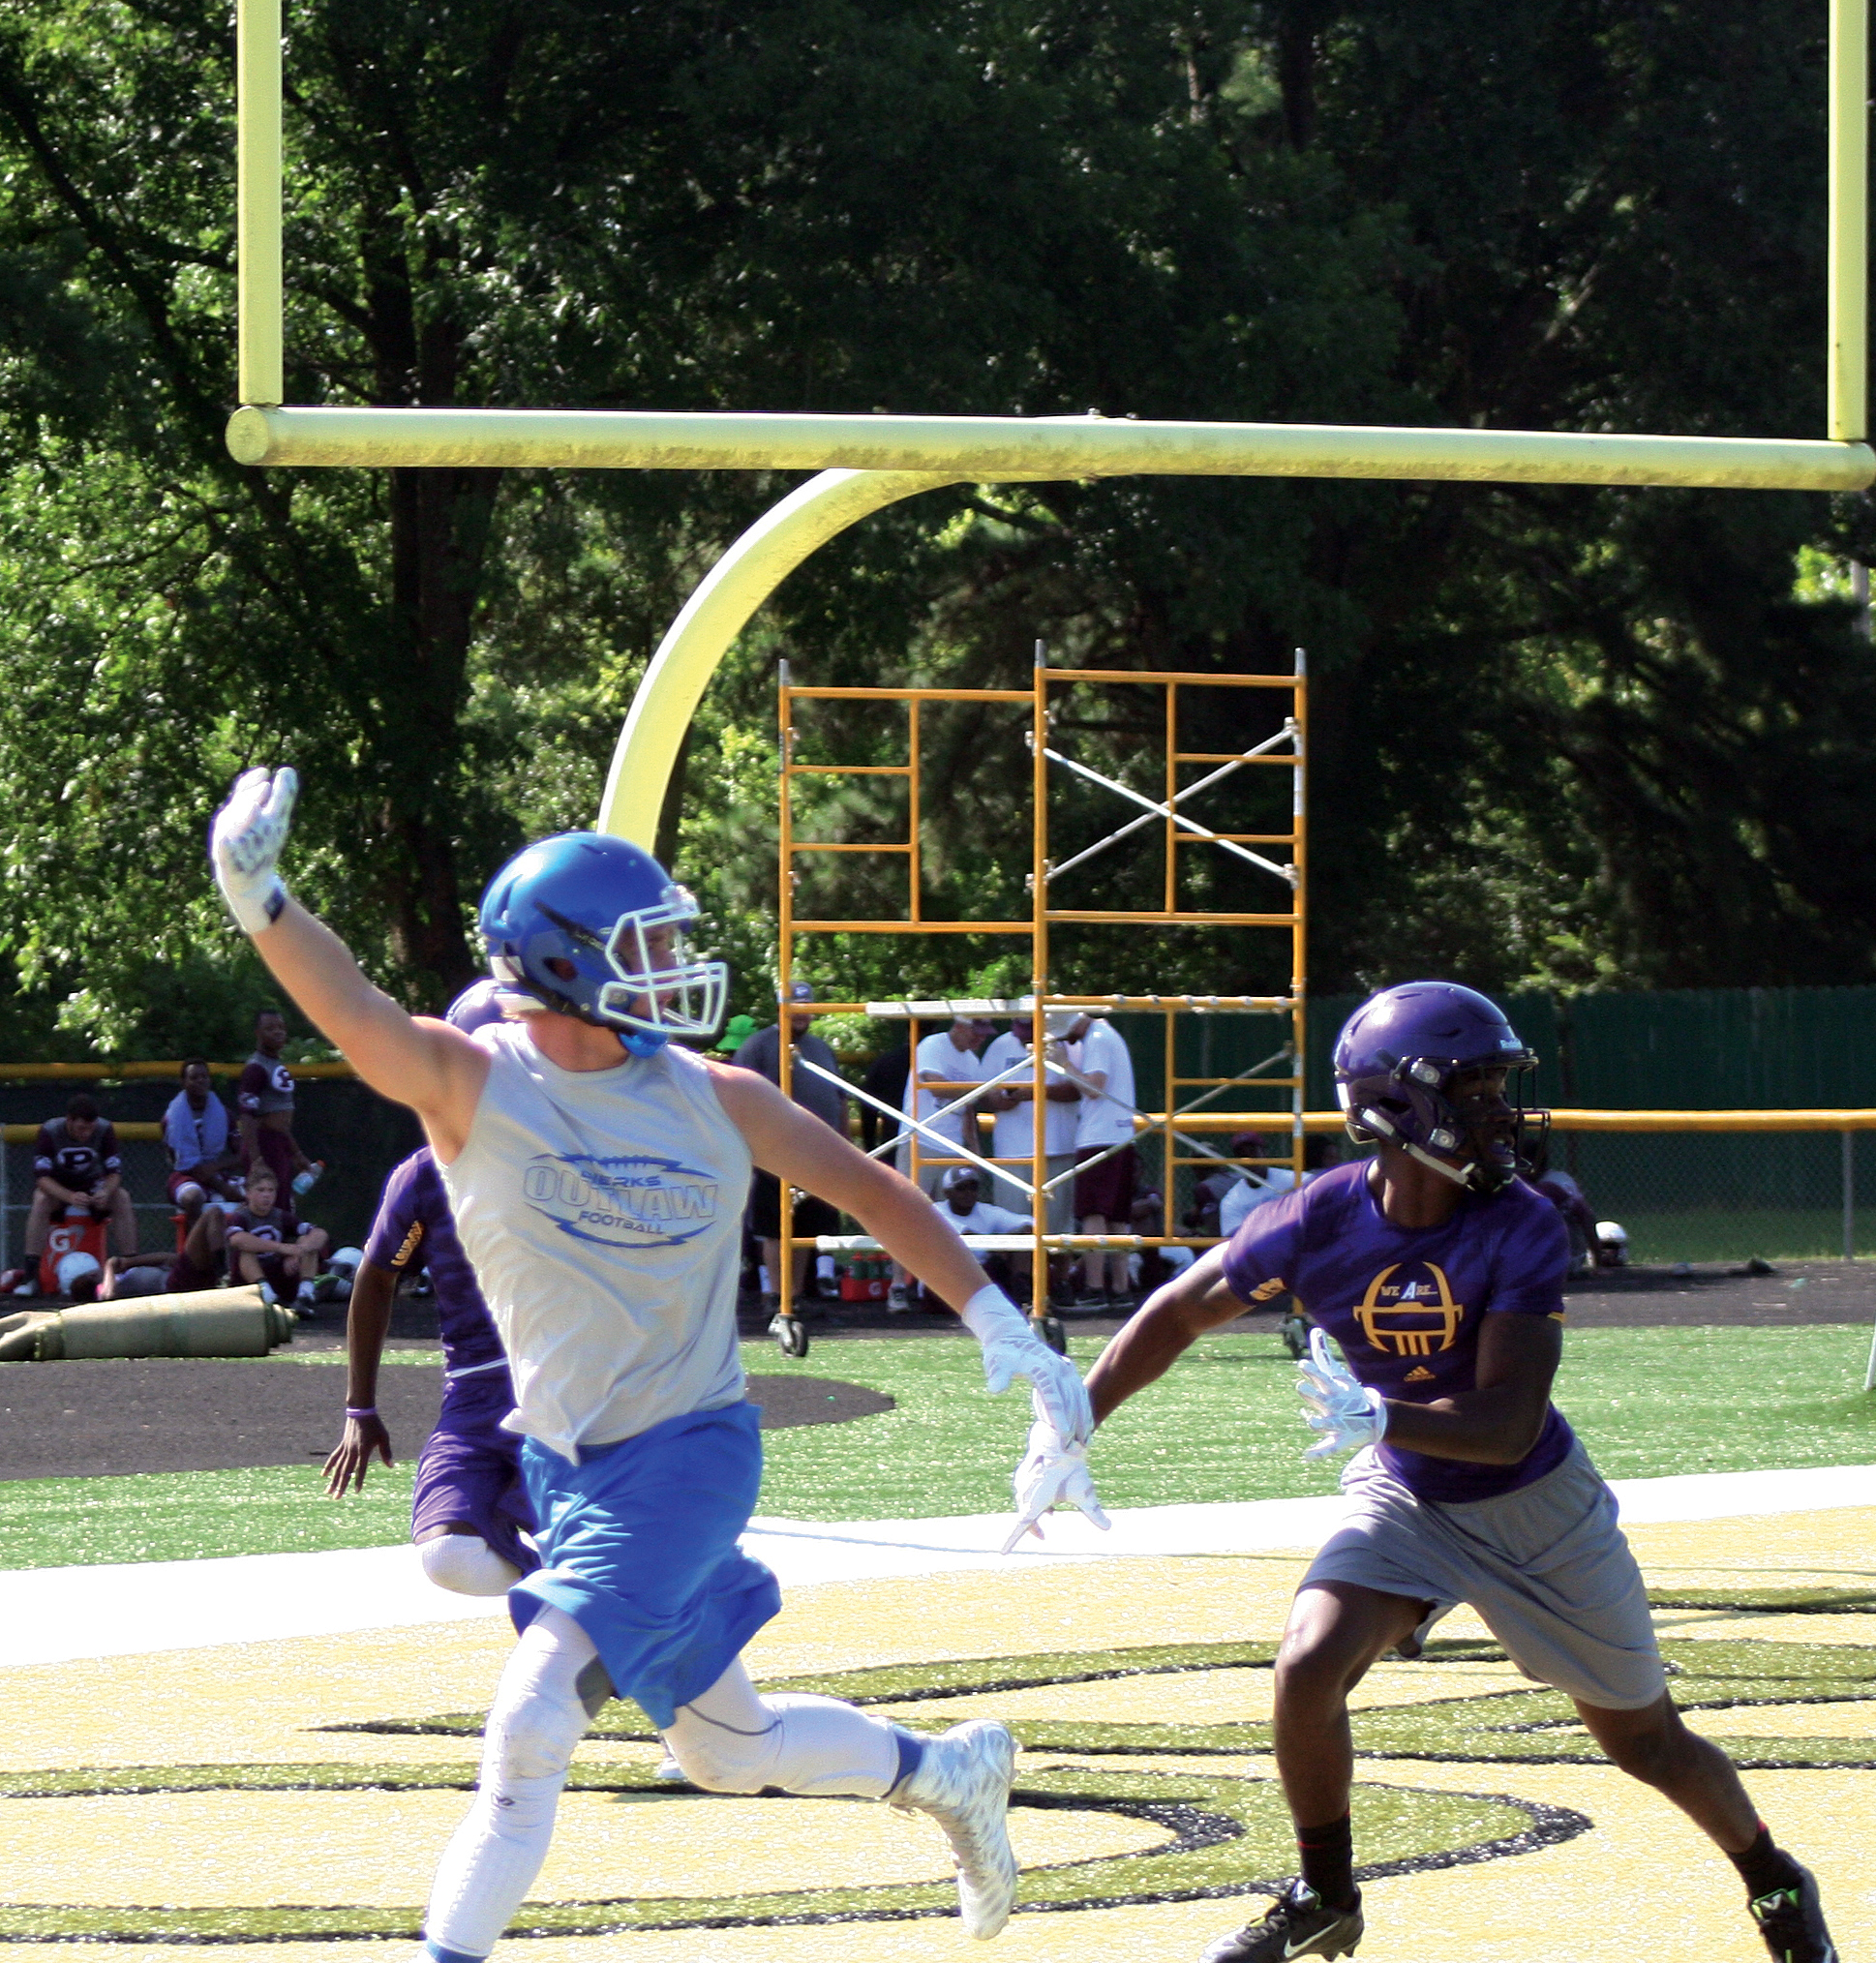 A Dierks receiver working the end zone during 7-on-7 action at Mineral Springs.